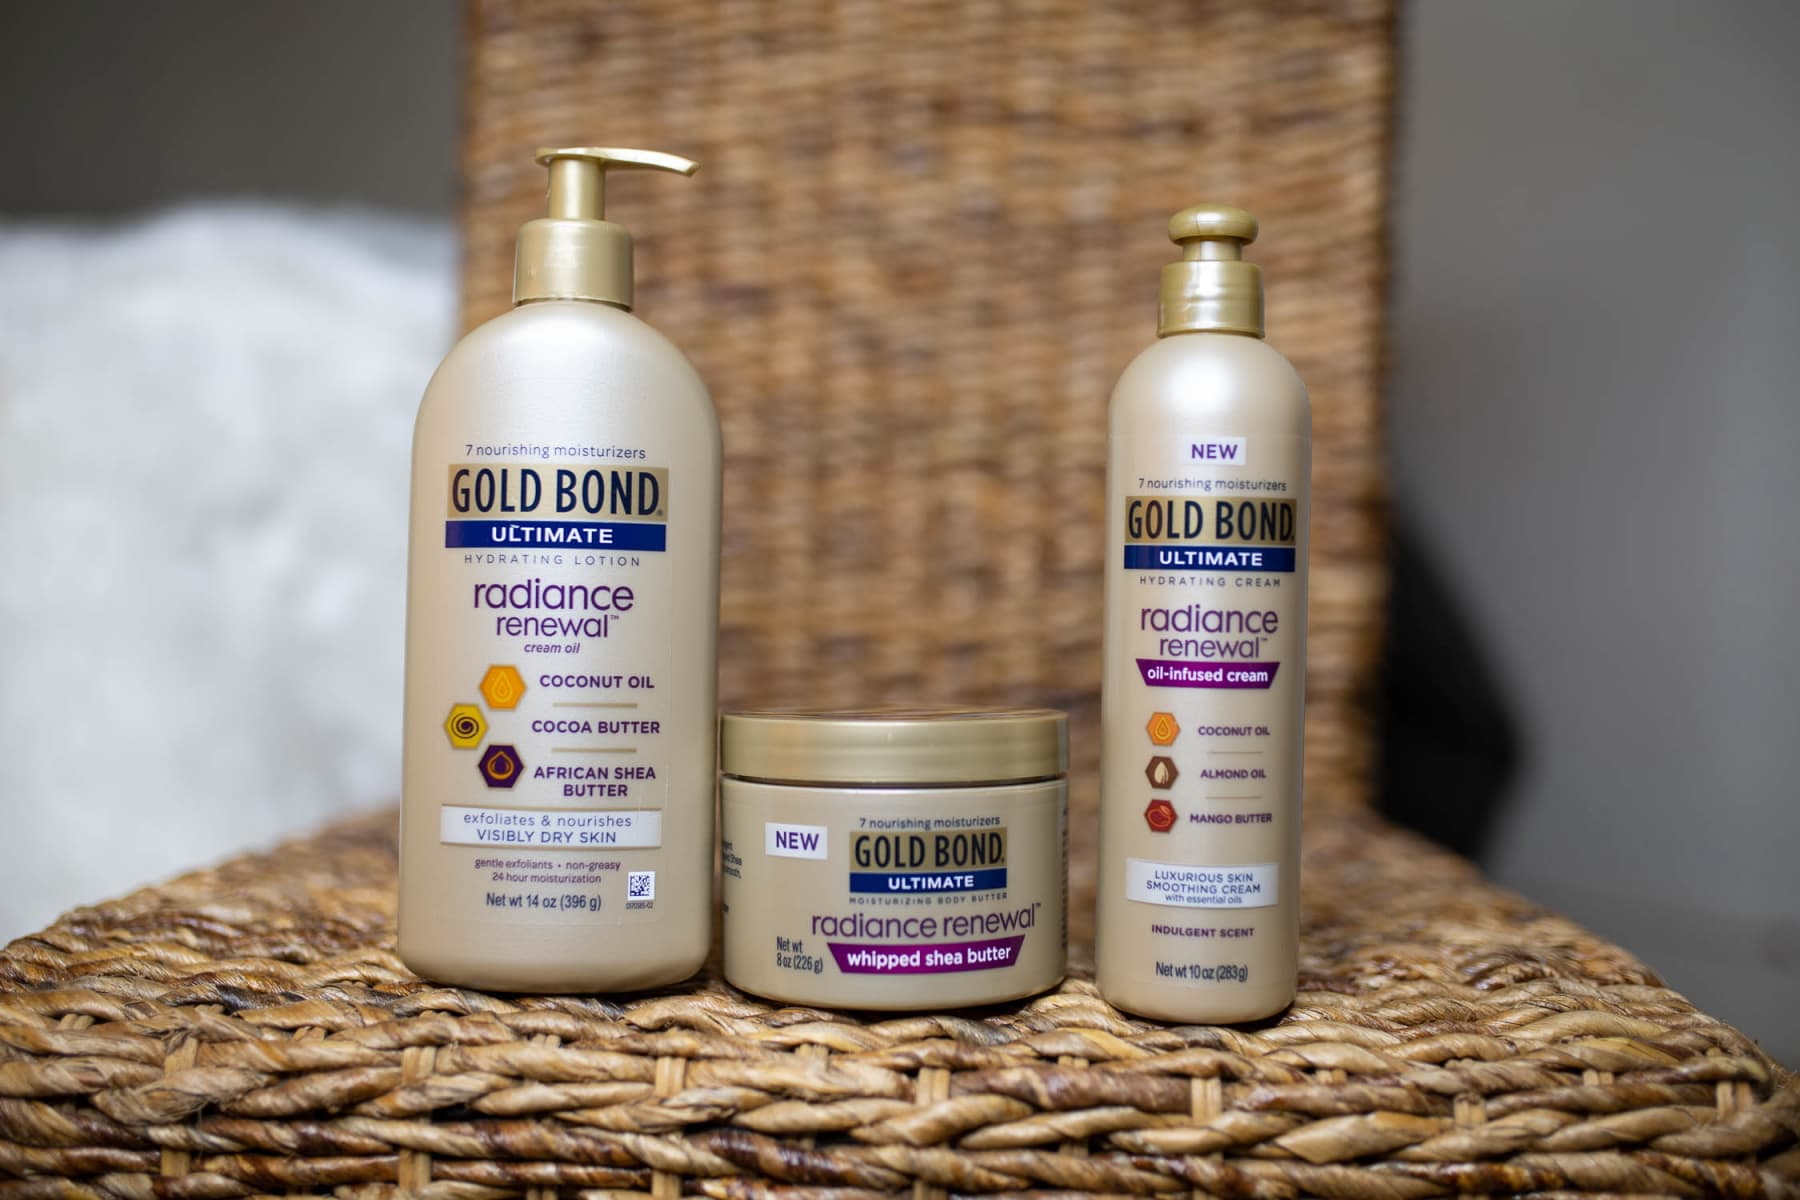 Gold Bond Radiance Renewal Review: Oil-Infused Cream, Lotion, Whipped Shea Butter